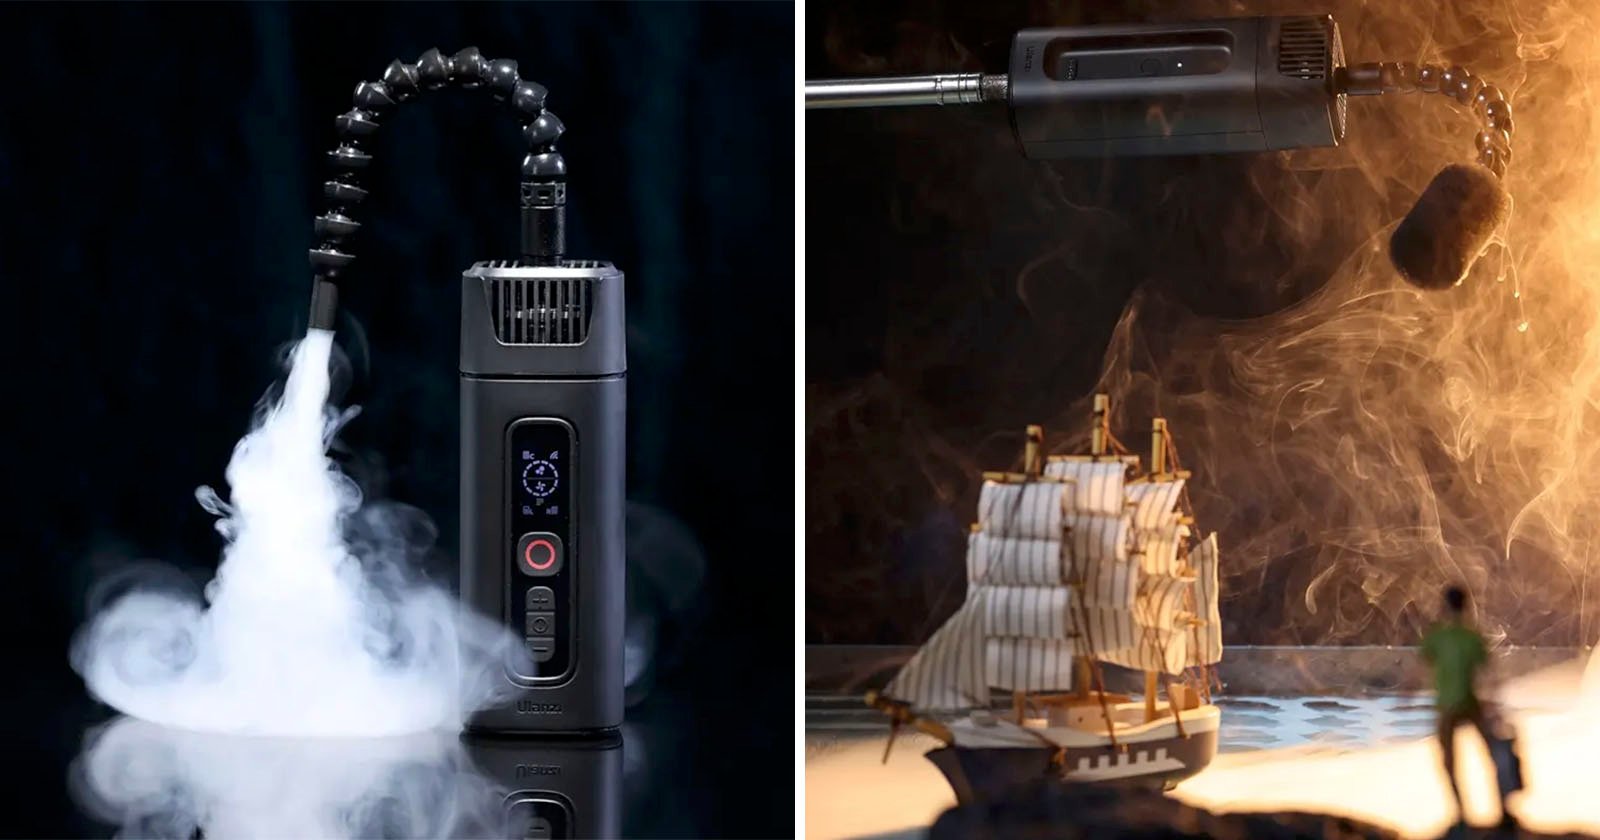 Ulanzis New Portable Fog Machine is Handheld and Costs Under $90